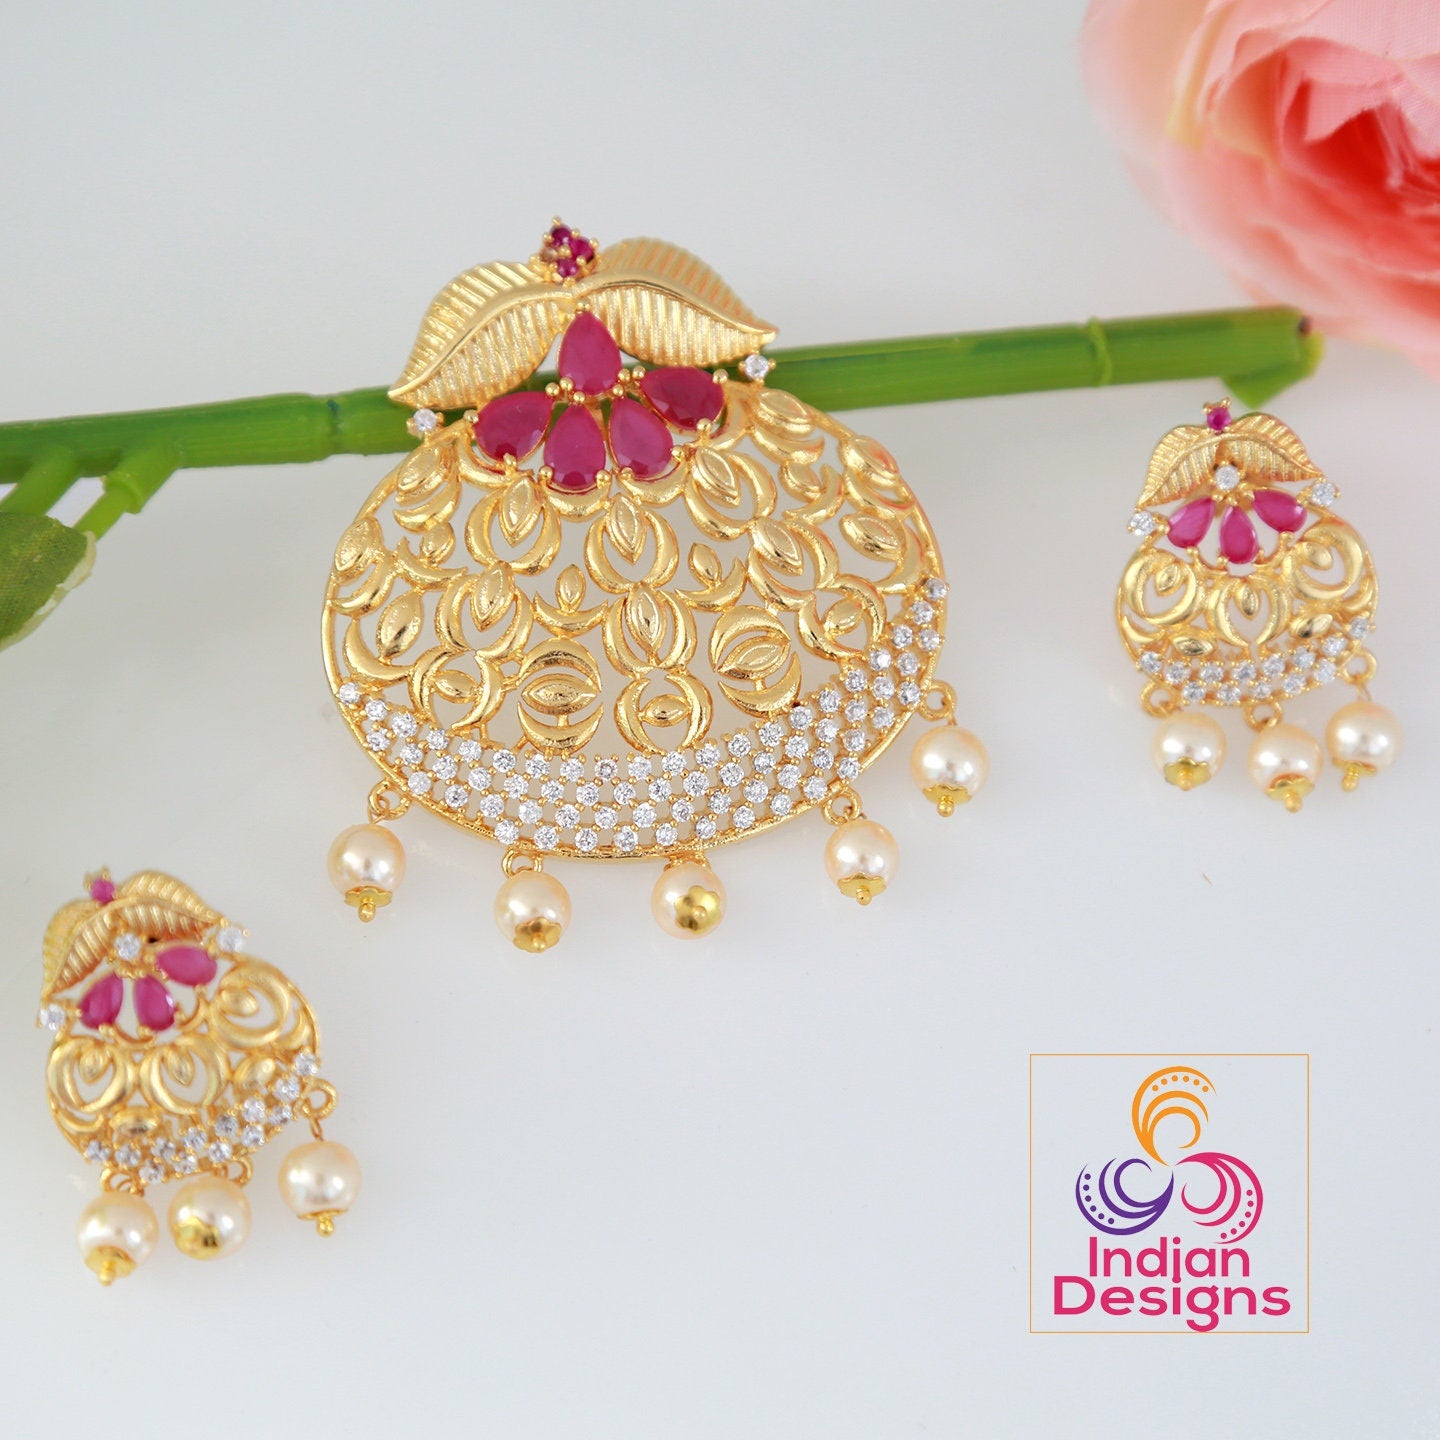 Floral art pendant | 22K Gold plated American Diamond Pendant Set with Ruby and Emerald Stones | Gold plated pendant set | Indian jewelry